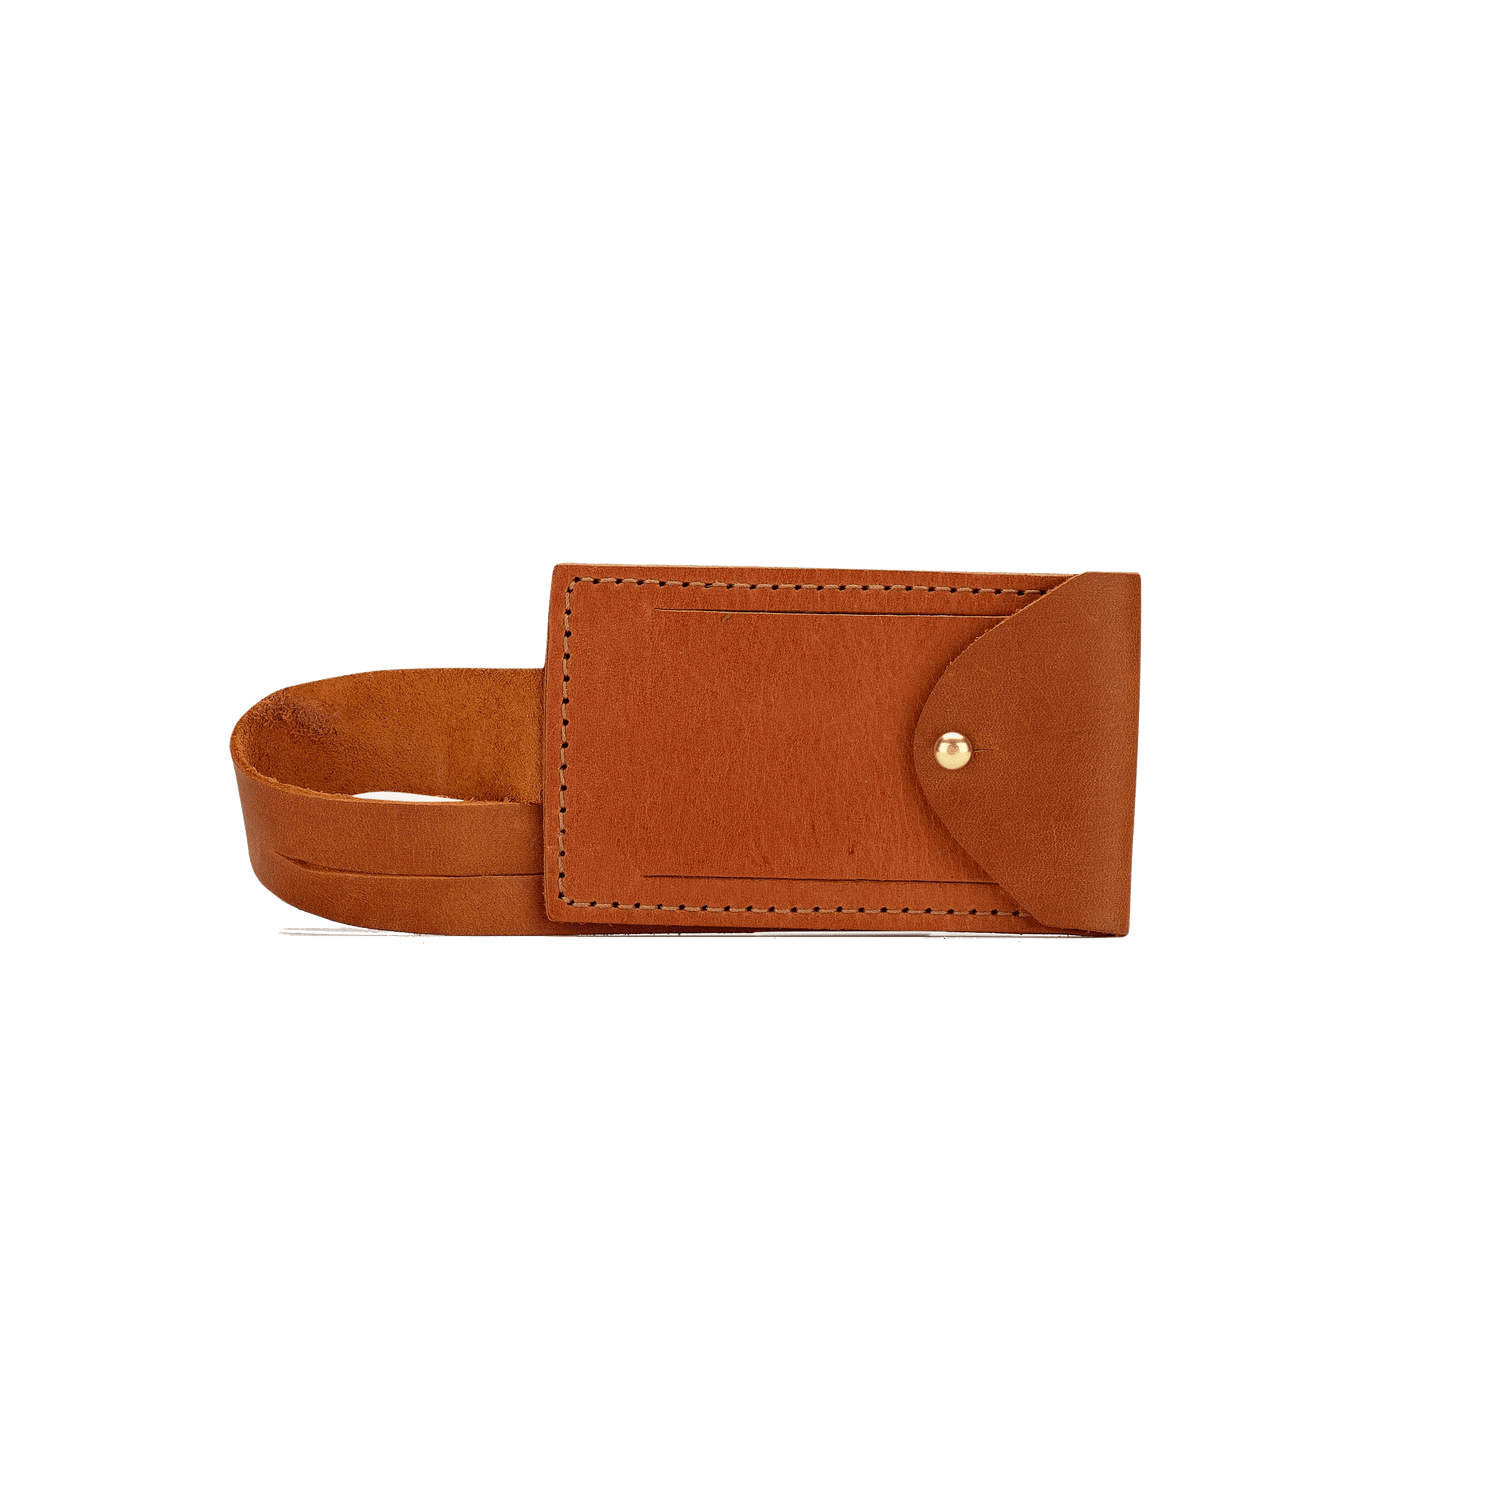 Ethically Crafted Sustainable Leather / 805 Luggage Tag / Rust Brown / Genuine Full Grain Leather / Parker Clay / Certified B Corp